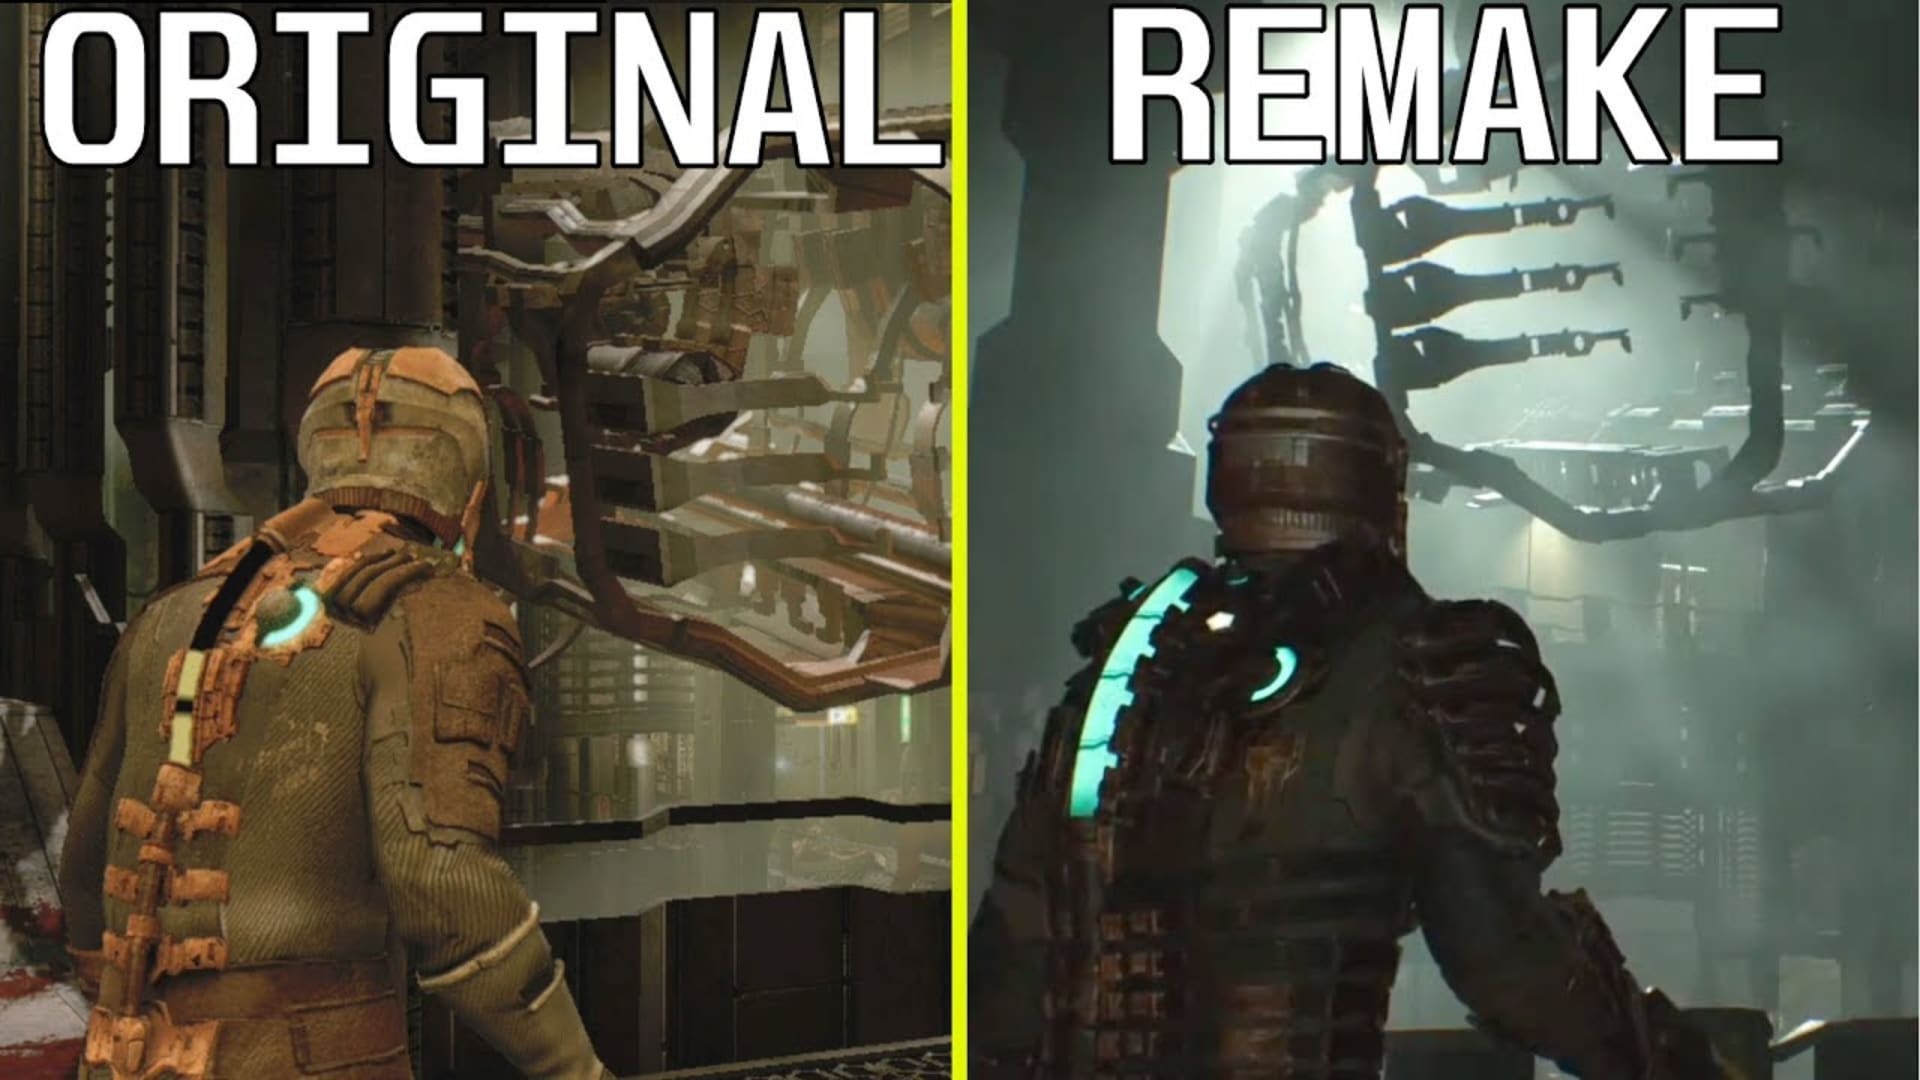 Dead-Space-remake-Comparasion-Video-GamersRD (1)